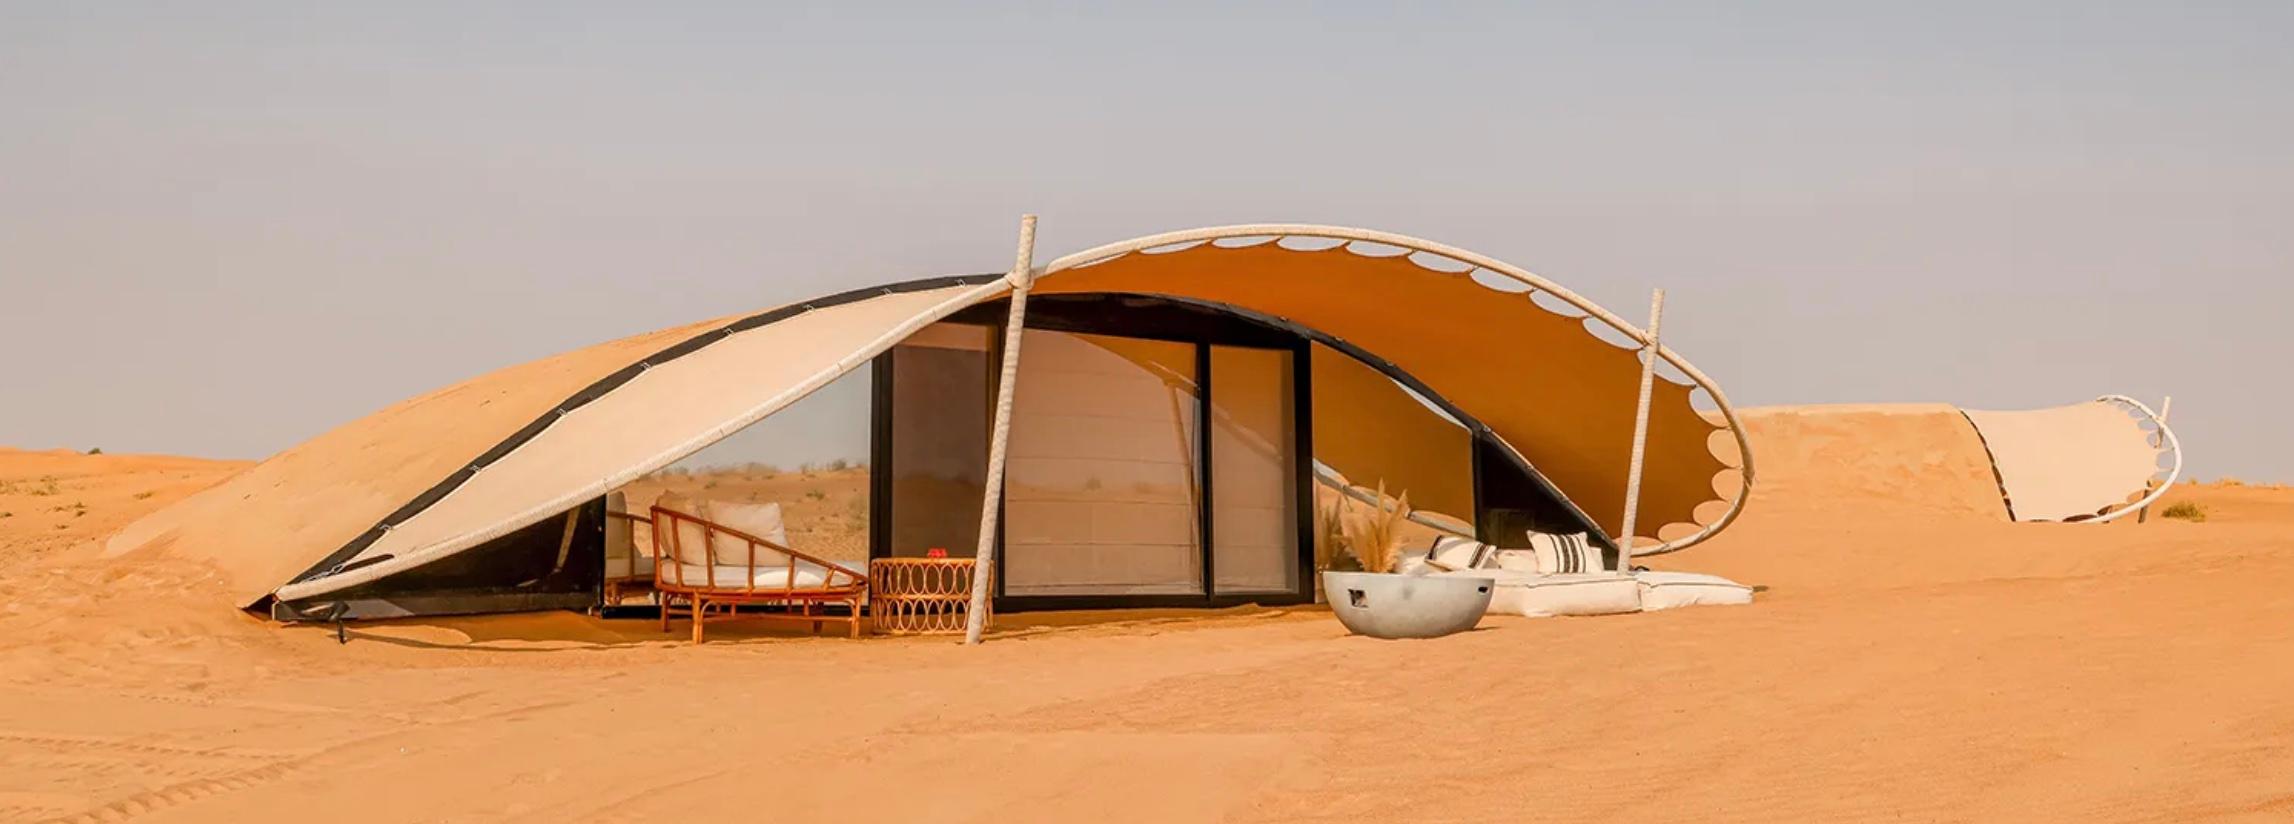 Staycation Spotlight: A desert stay with a difference at The Nest by Sonara